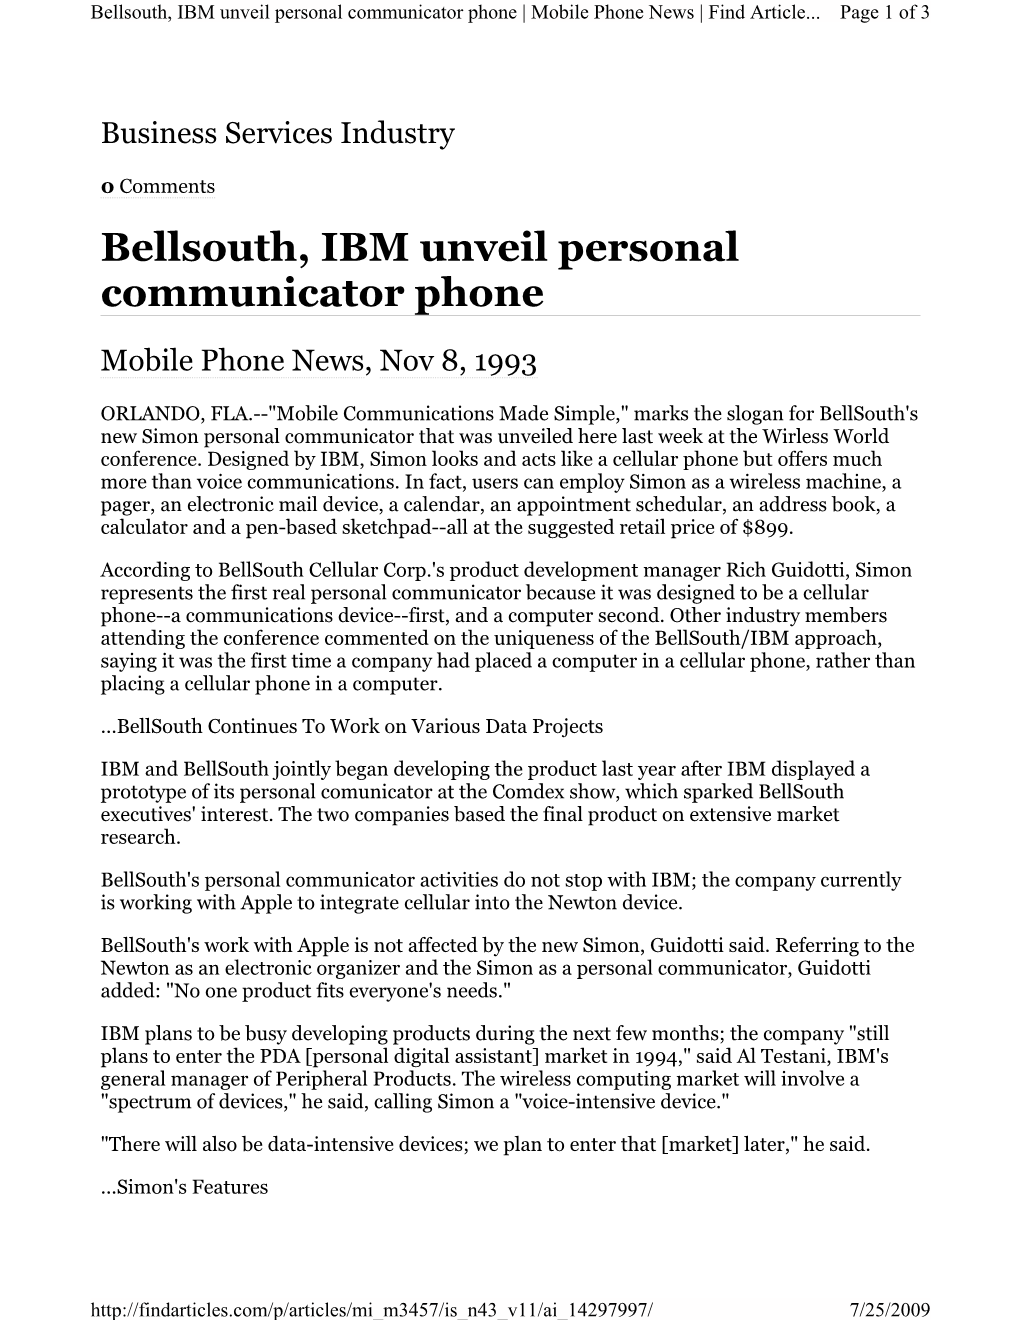 Bellsouth, IBM Unveil Personal Communicator Phone | Mobile Phone News | Find Article